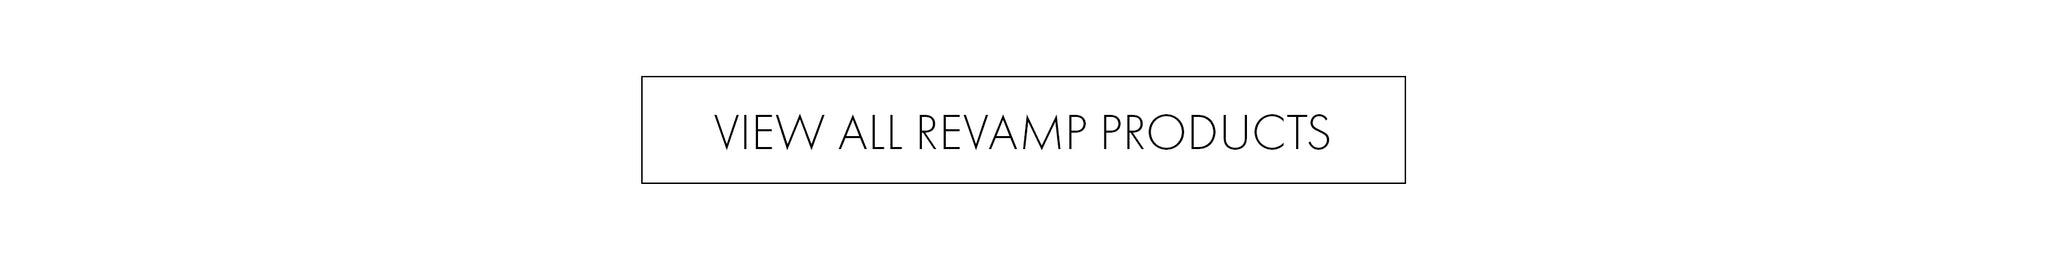 View All Revamp Products